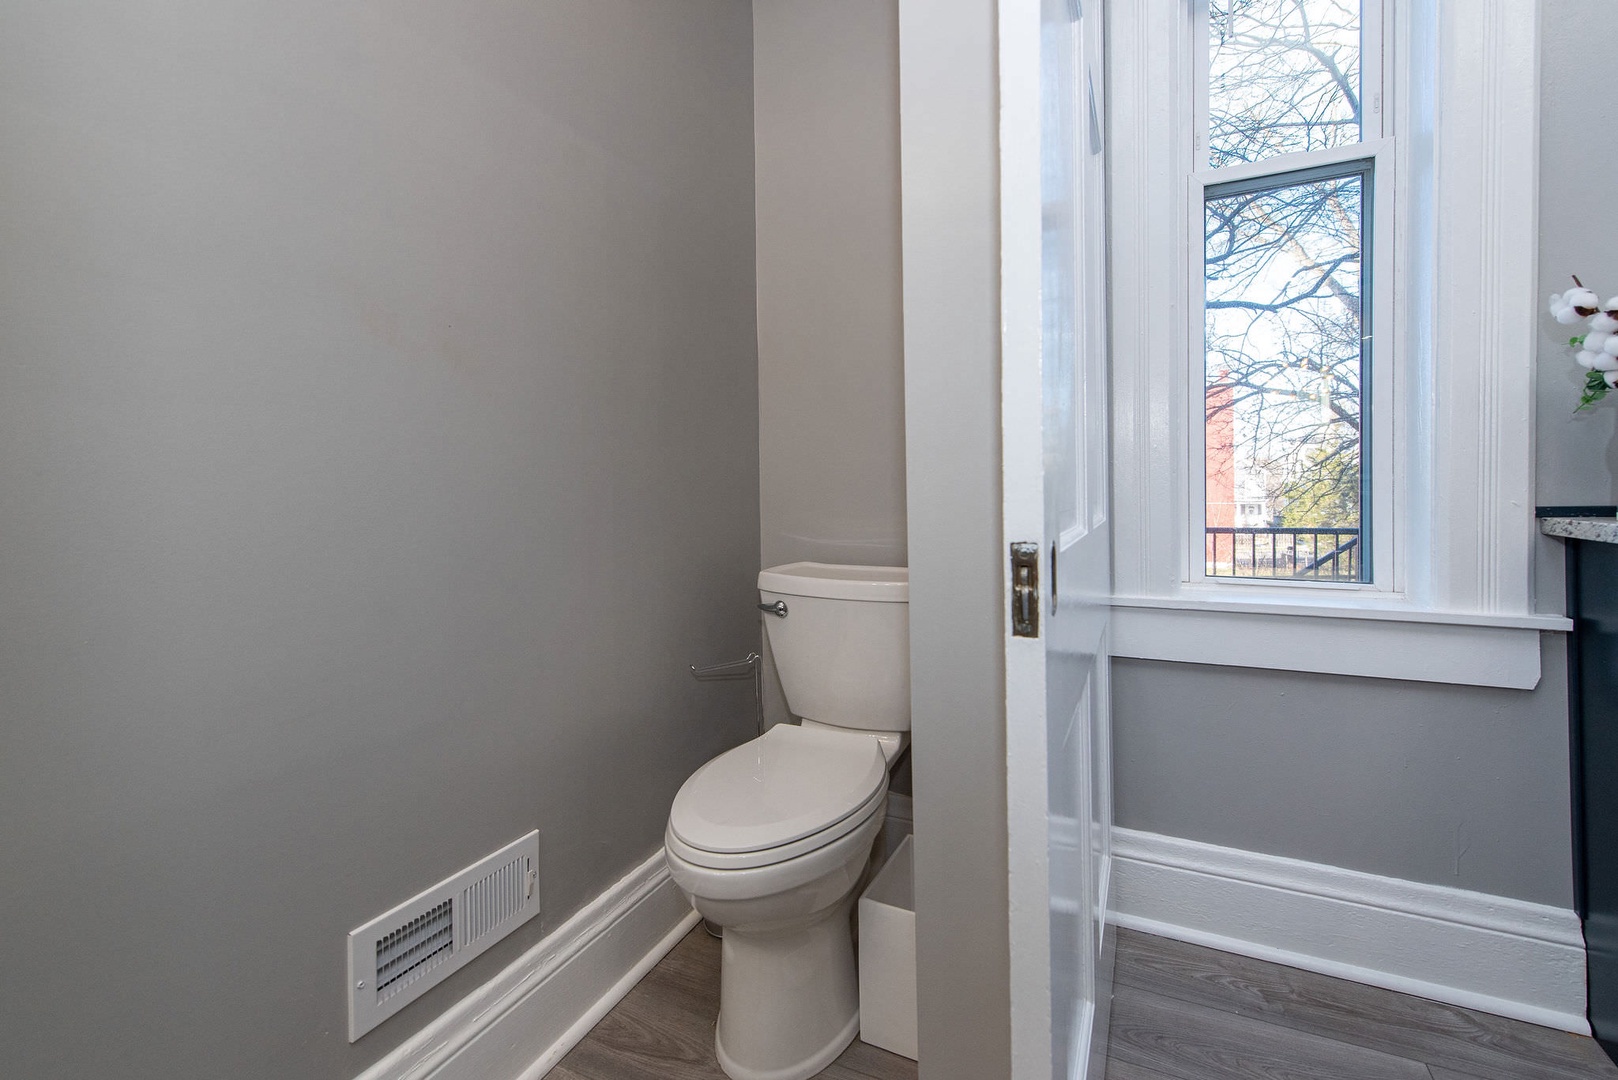 Suite 2 – A convenient half bath is tucked away on the main level